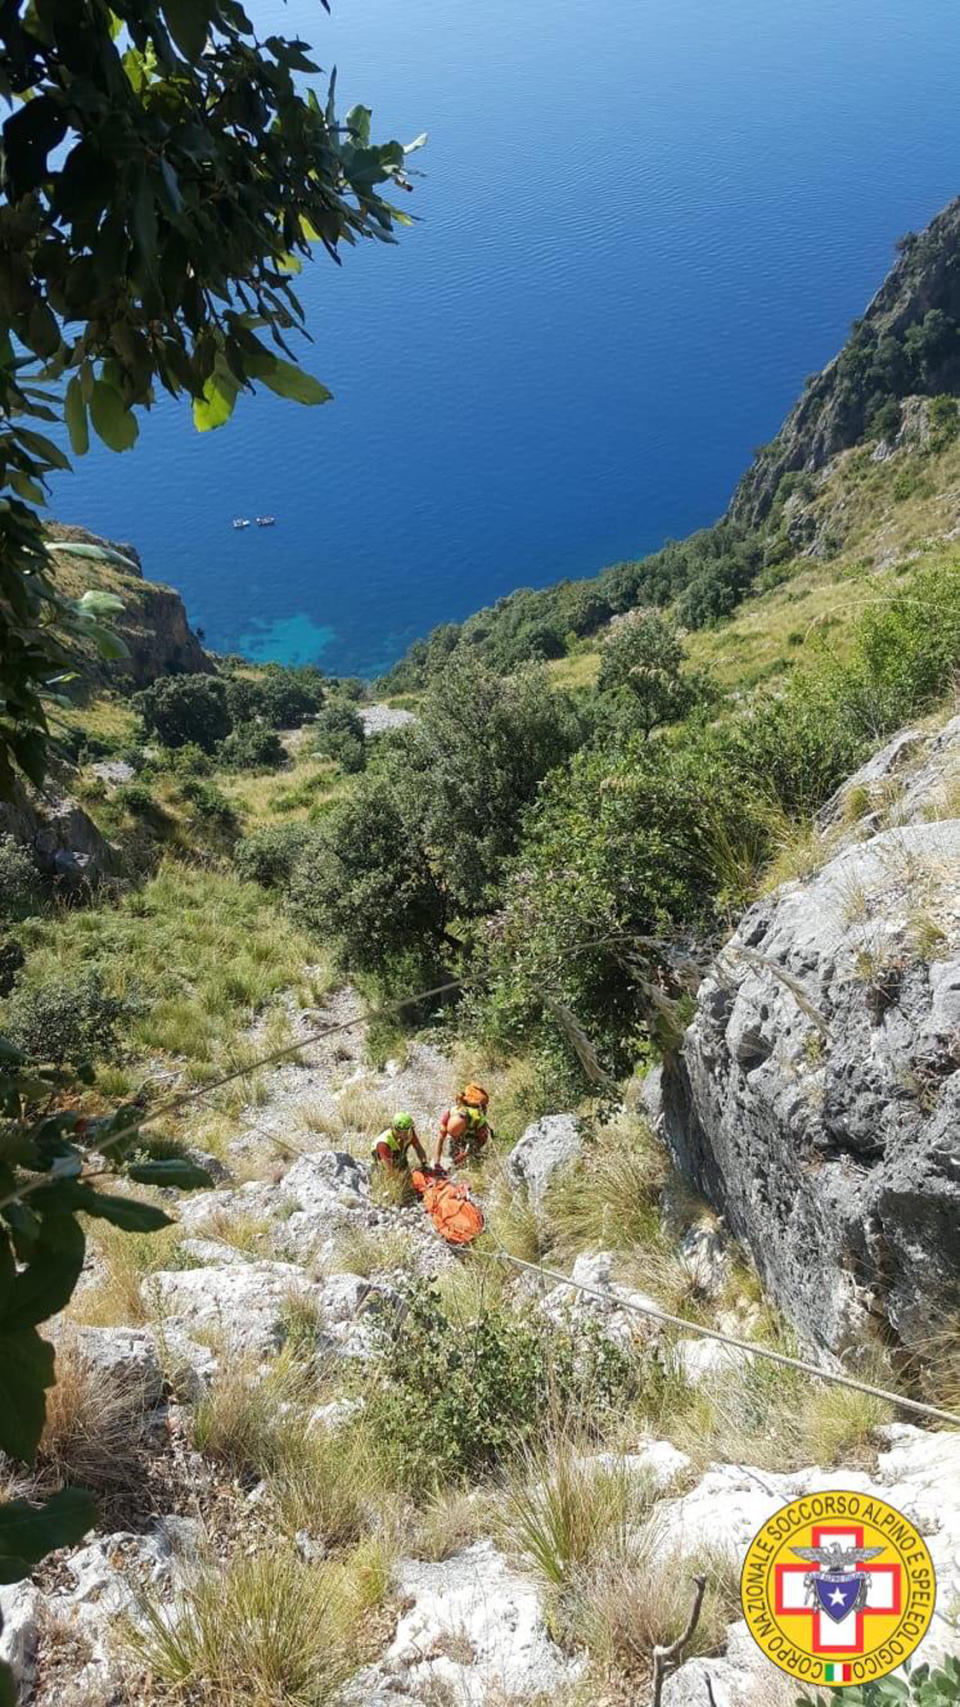 Members of the Italian mountain rescue team search for a French hiker in the Cilento region, Southern Italy, Monday, Aug. 19, 2019. Italian mountain rescue squads have recovered the body of a French hiker who fell into a ravine and broke his leg. Nine days of search ended Sunday when alpine rescue spotted Simon Gautier’s backpack and then his body in a ravine in the Cilento region of Southern Italy. Crews were able to recover the body Monday. (Corpo Nazionale Soccorso Alpino e Speleologico via AP)